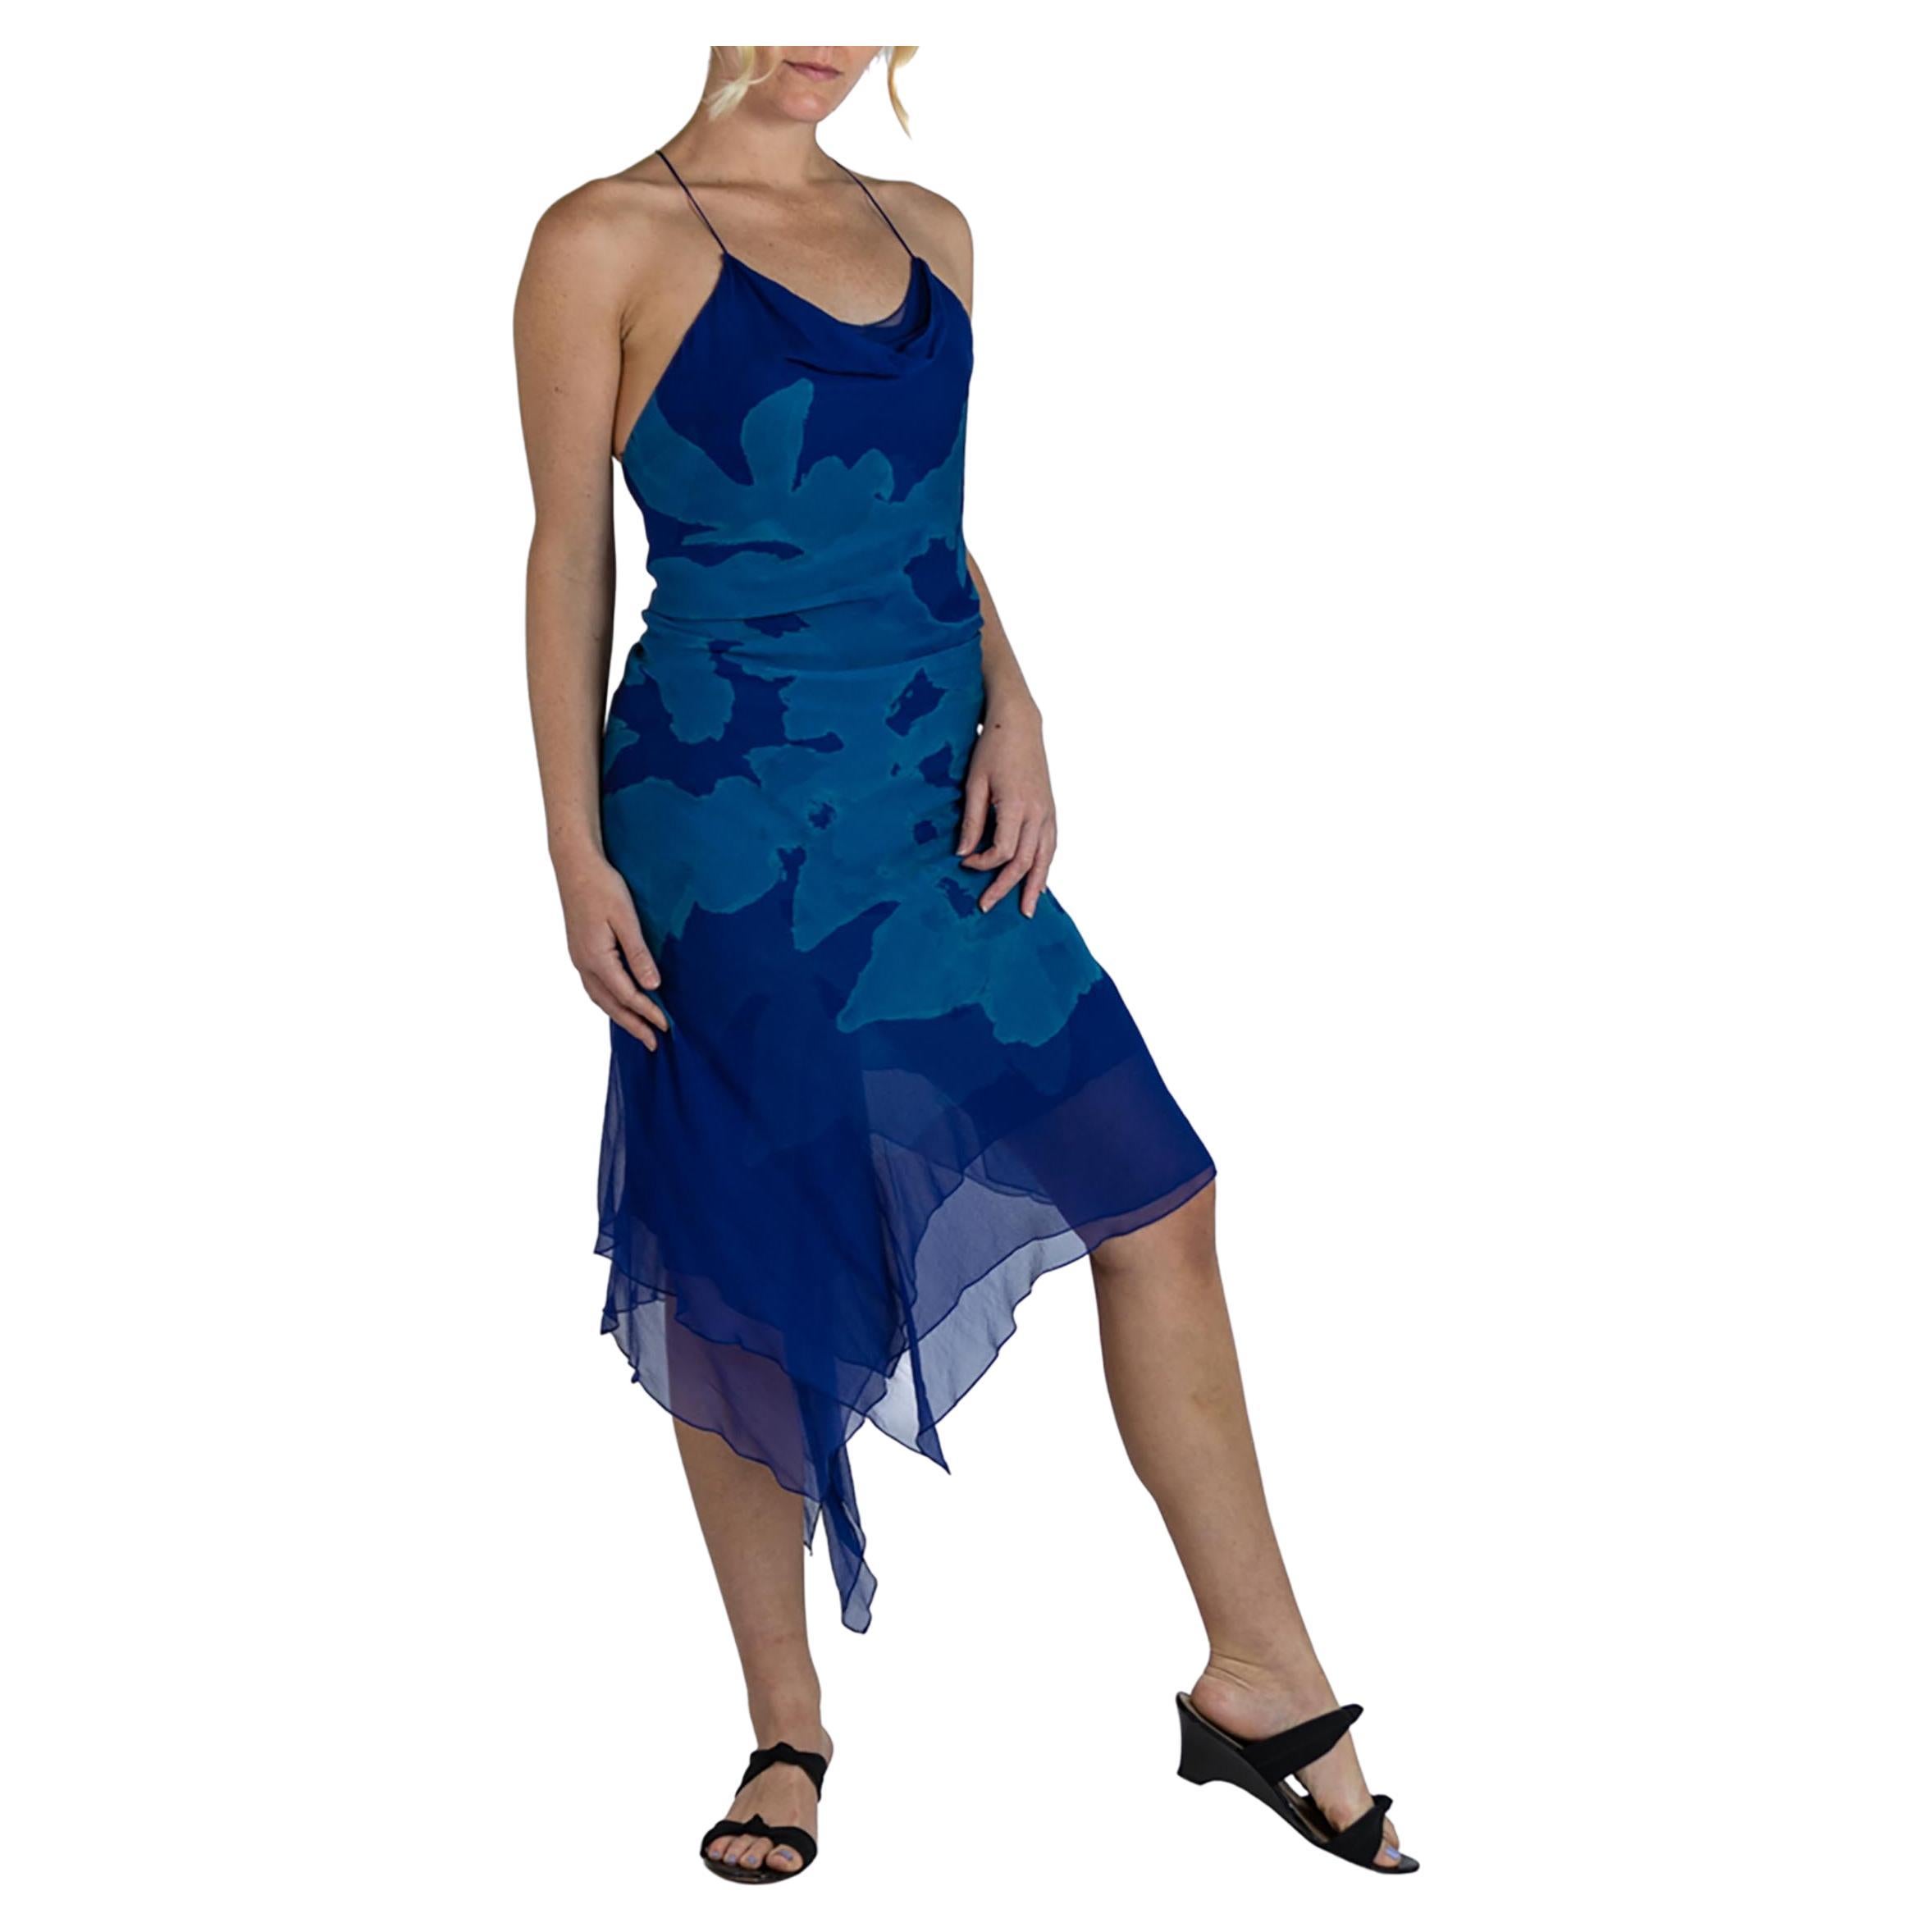 1990S DONNA KARAN Blue Bias Cut Silk Mousseline Chiffon Cocktail Dress In Excellent Condition For Sale In New York, NY